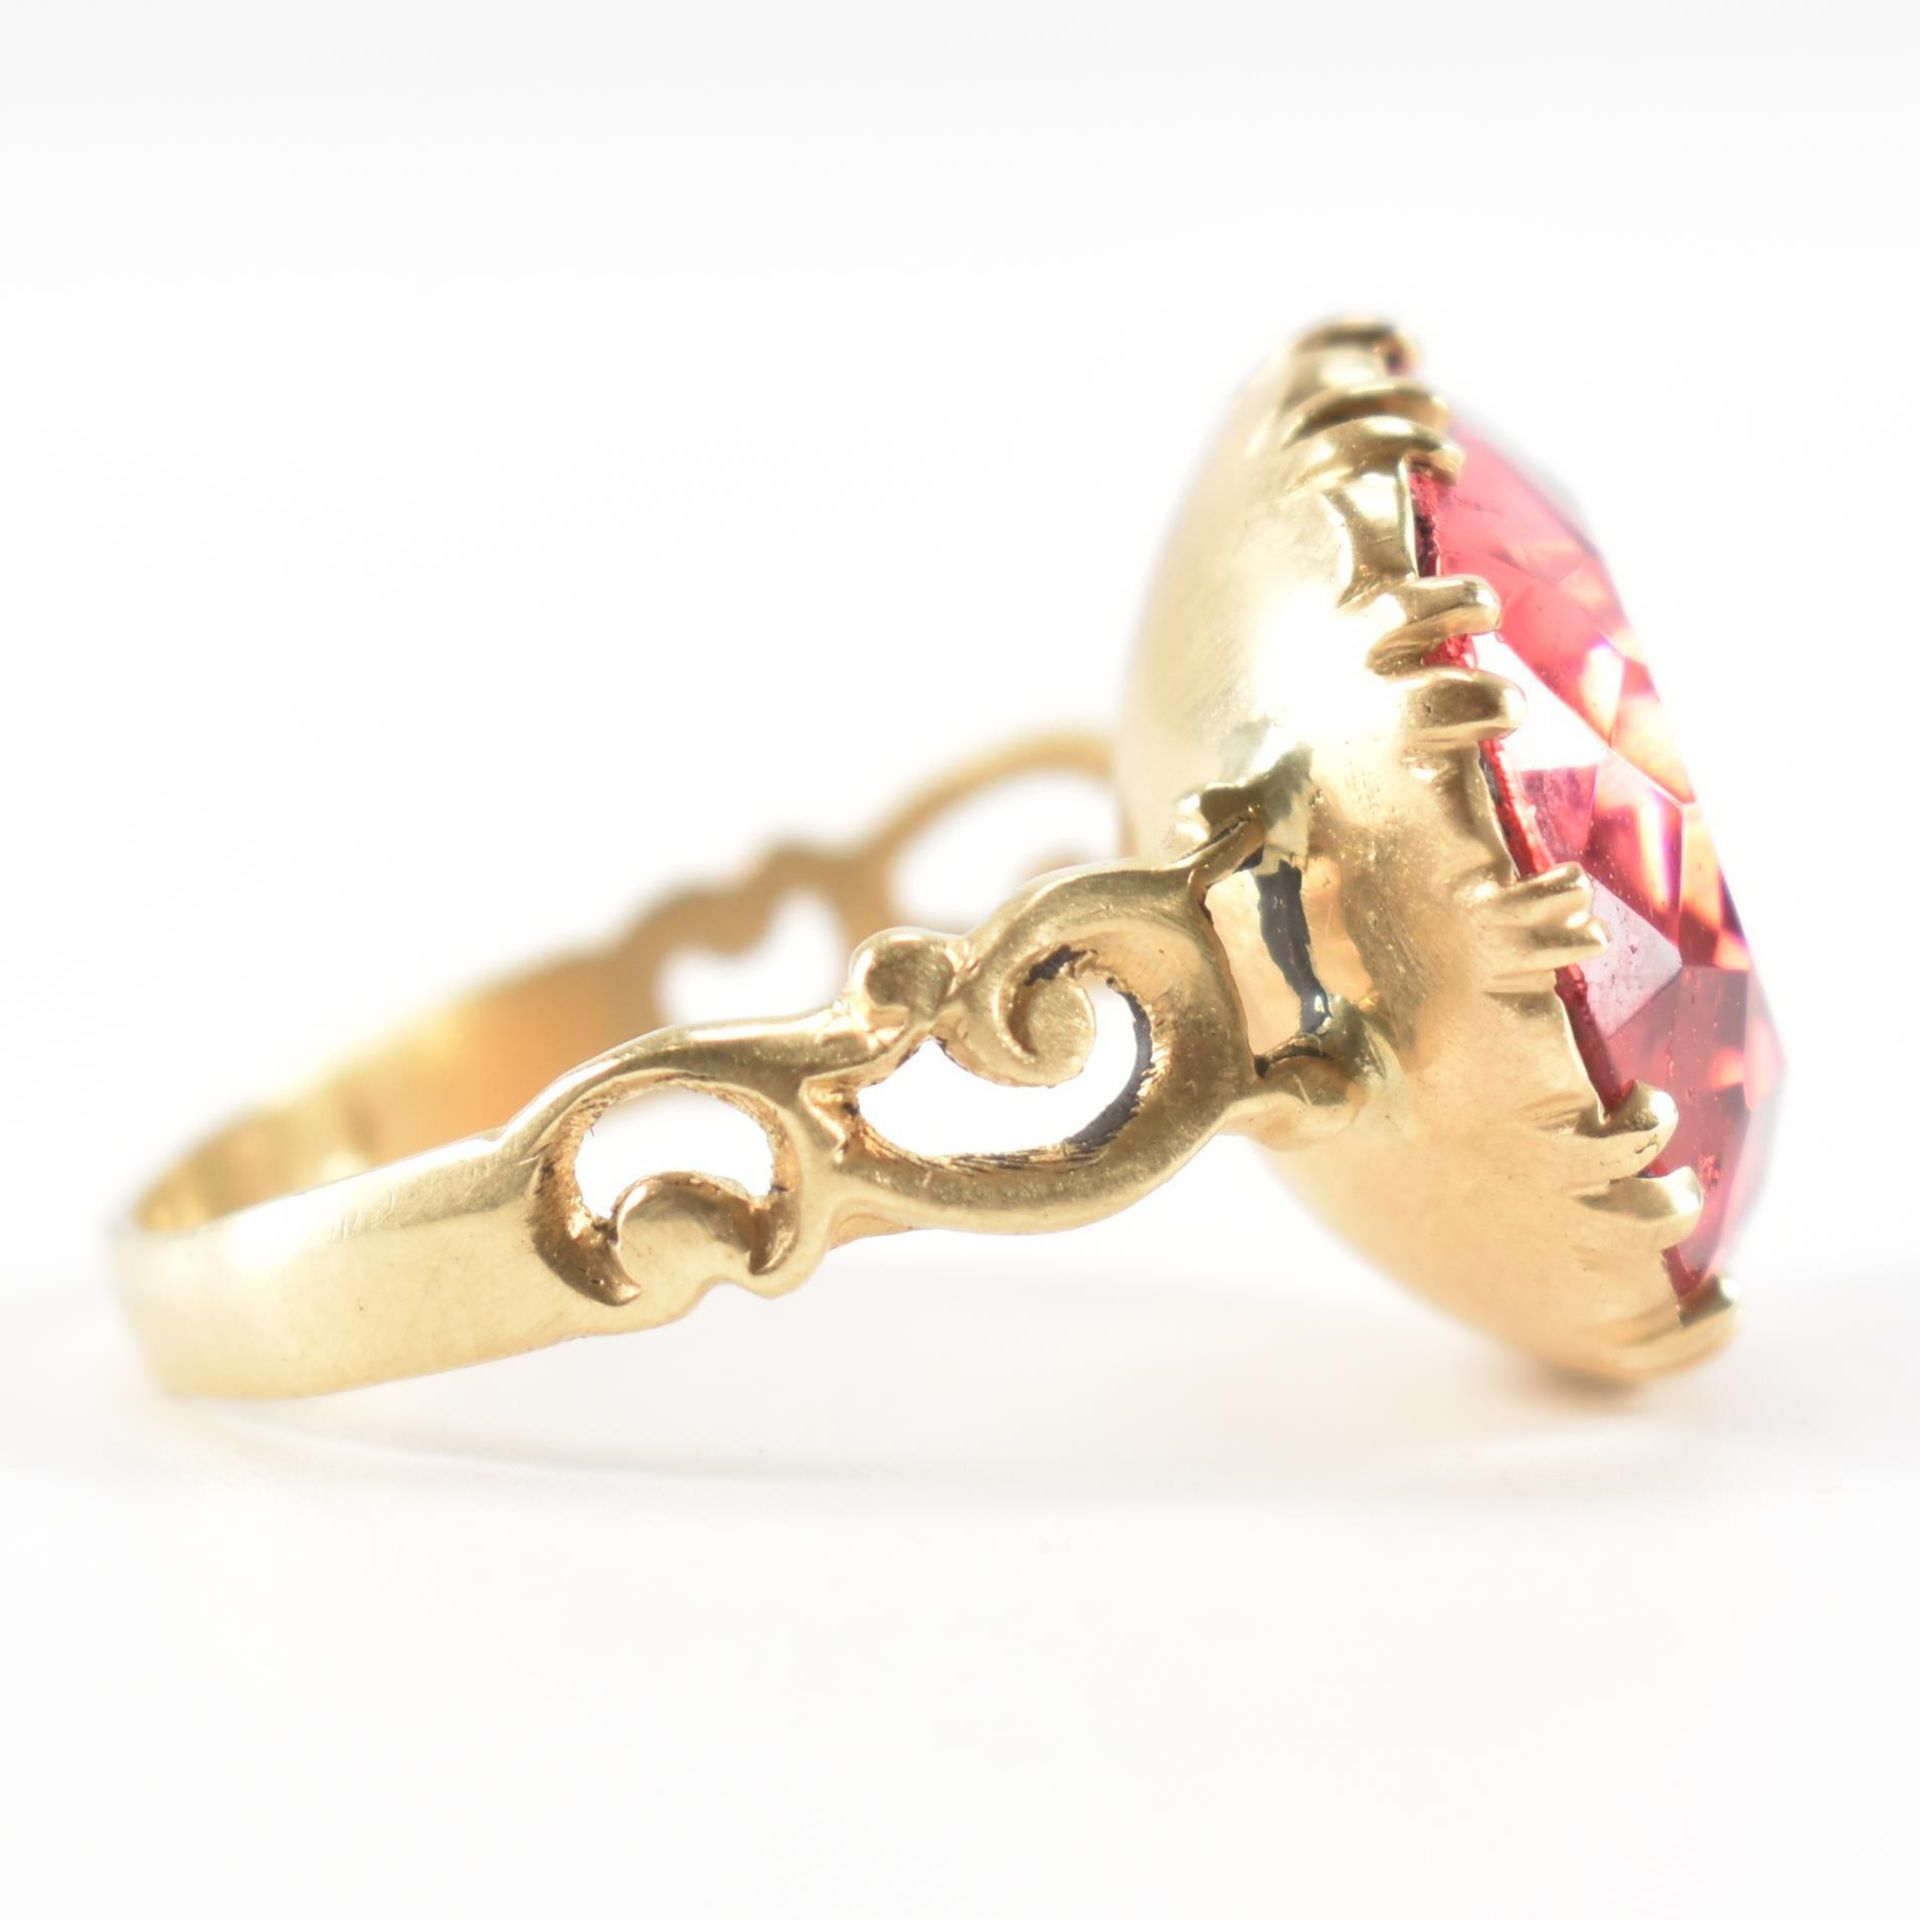 ANTIQUE GOLD & RED PINK PASTE STONE DRESS RING - Image 5 of 8